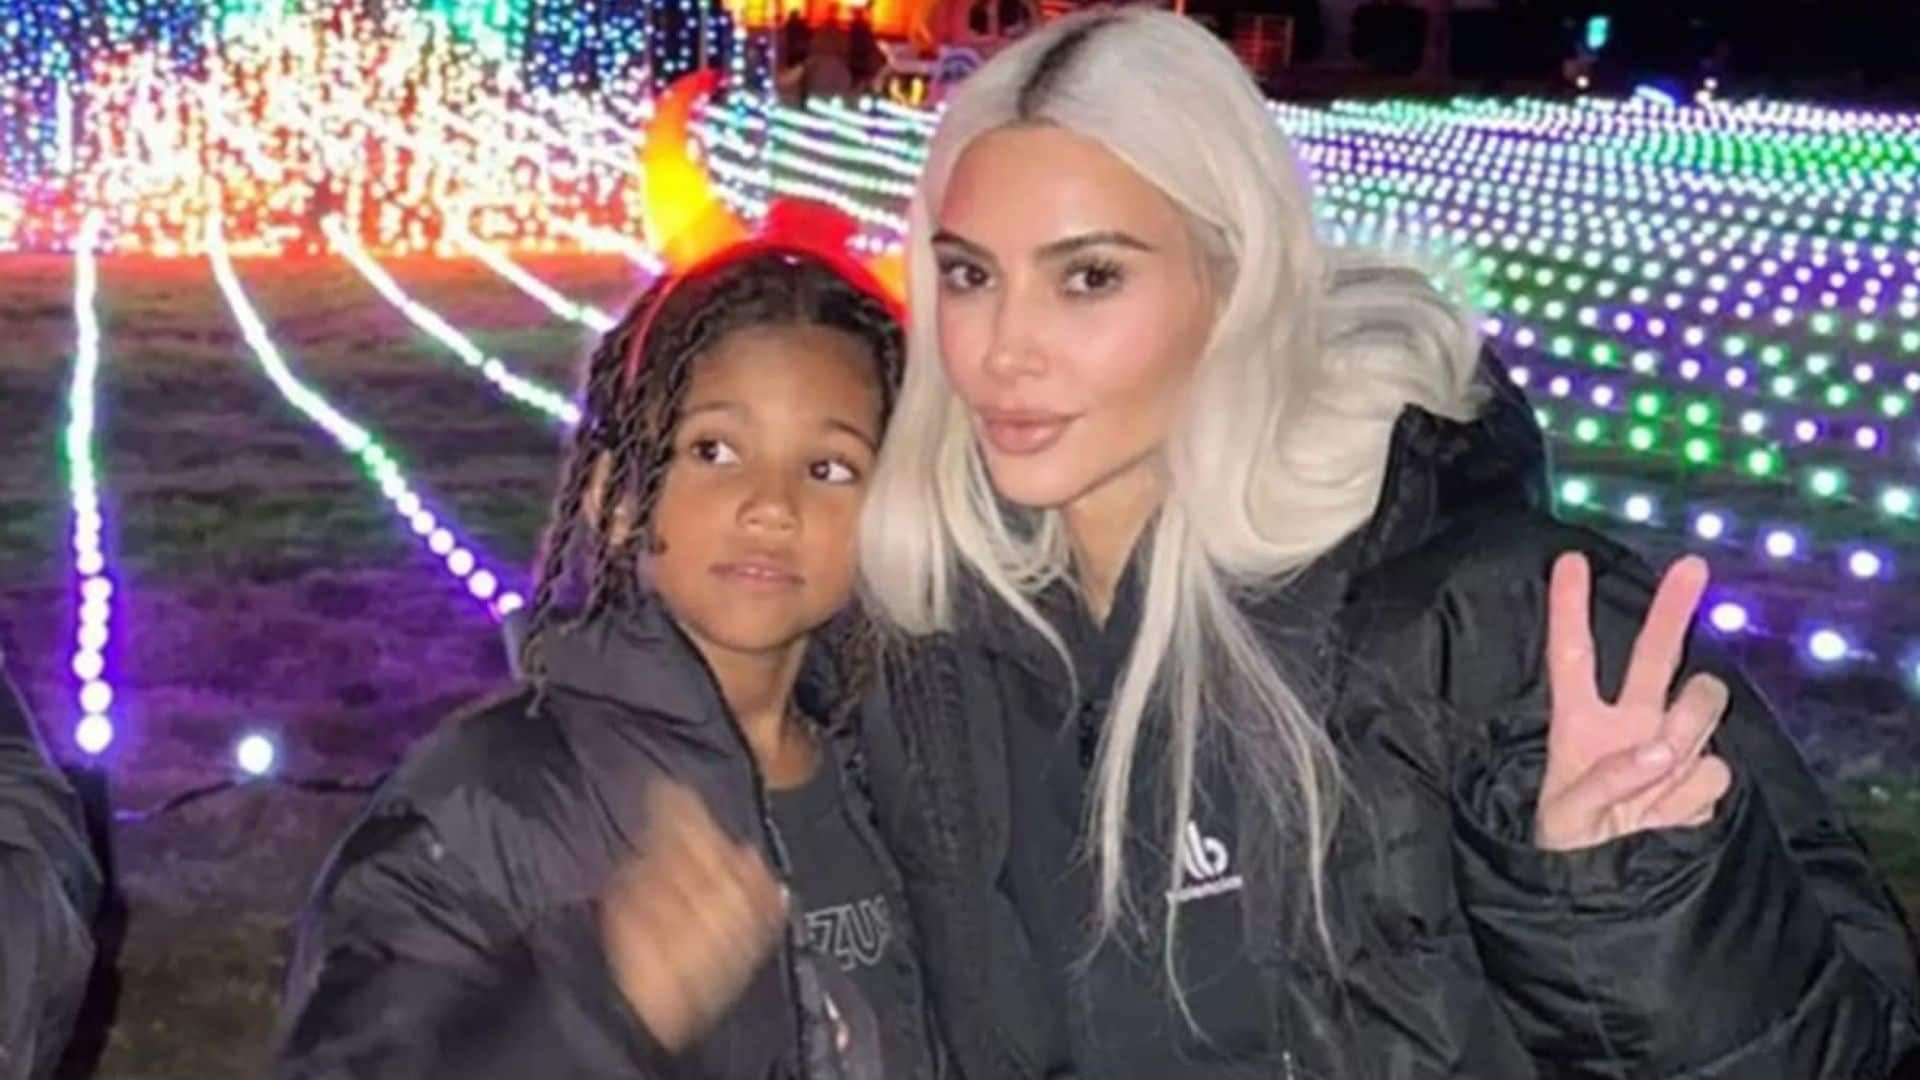 Kim Kardashian goes on Halloween adventure with her kids amid Kanye West controversy